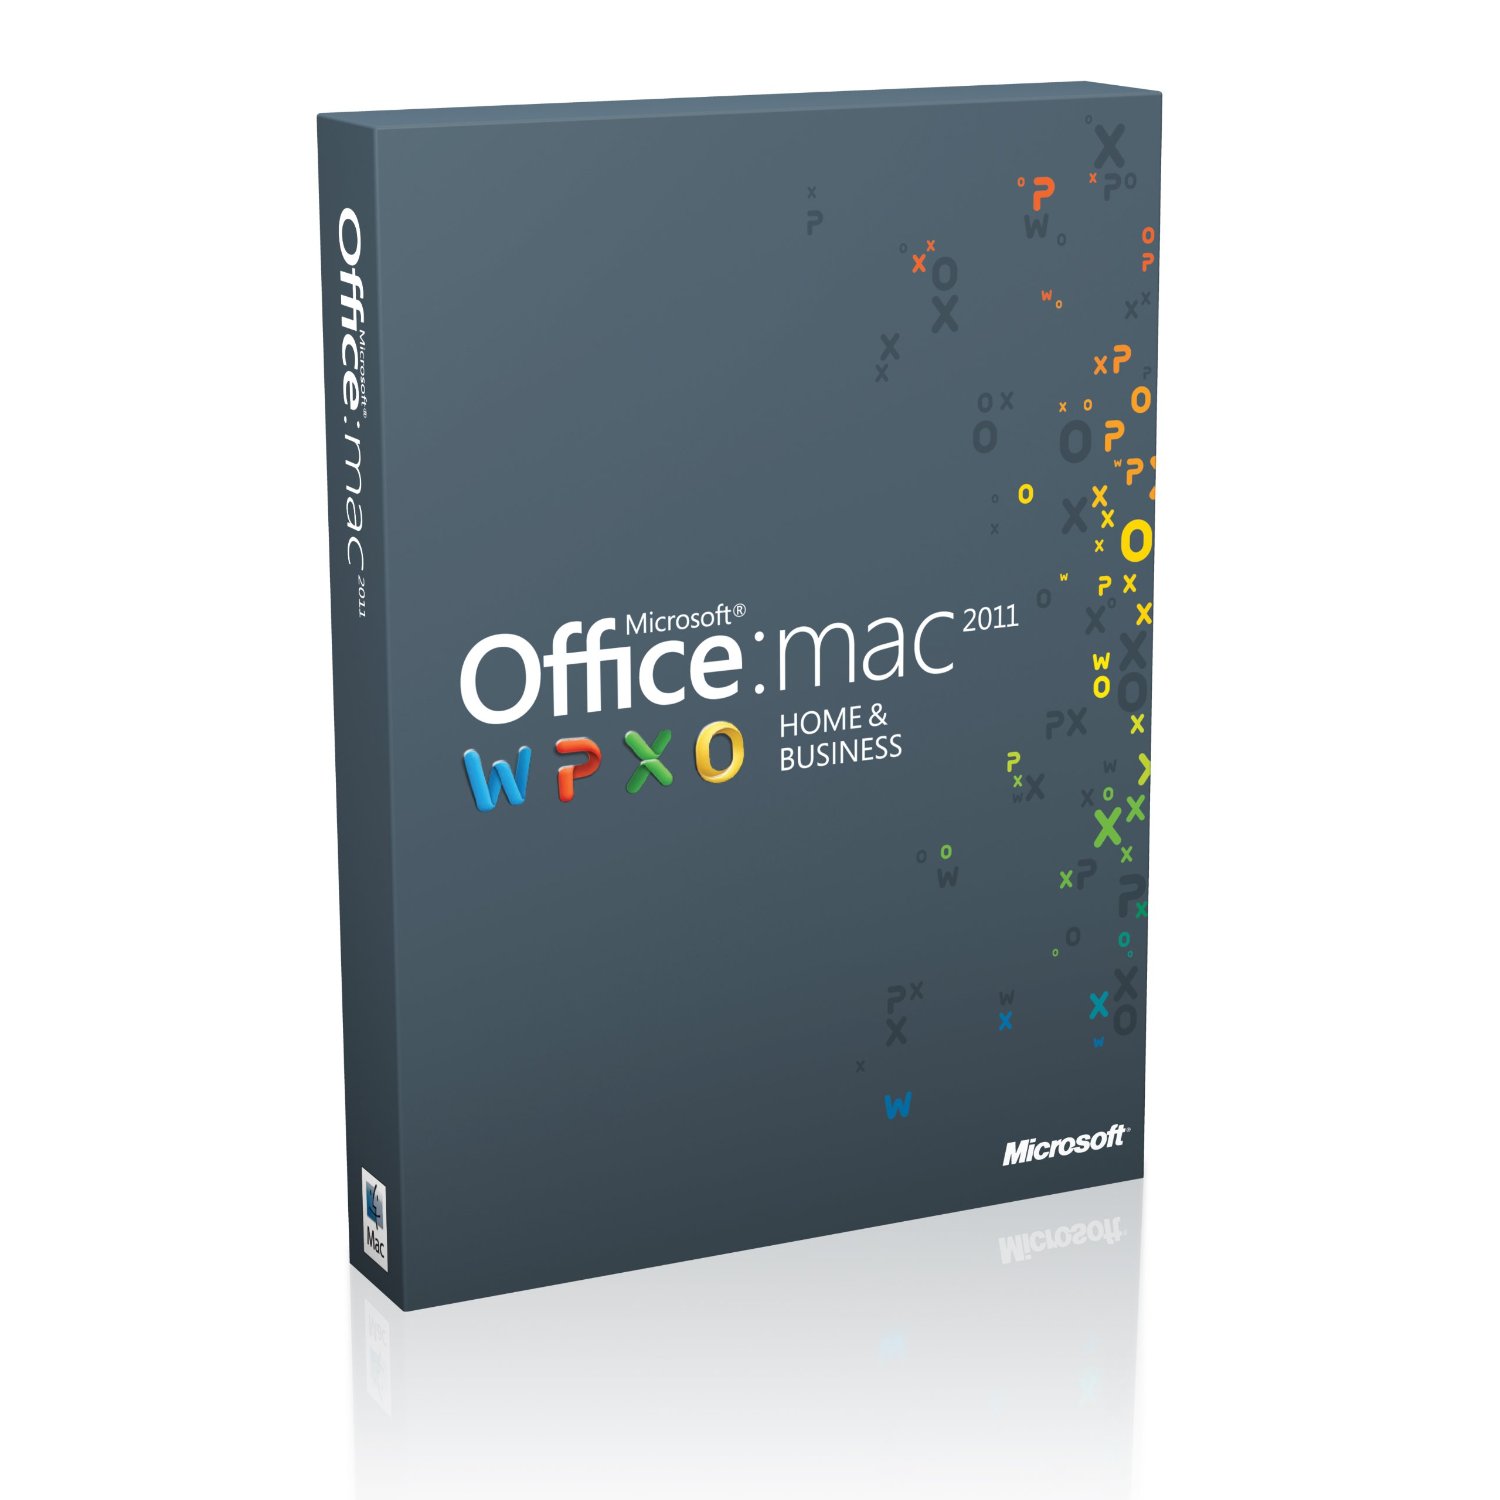 download microsoft office for macbook